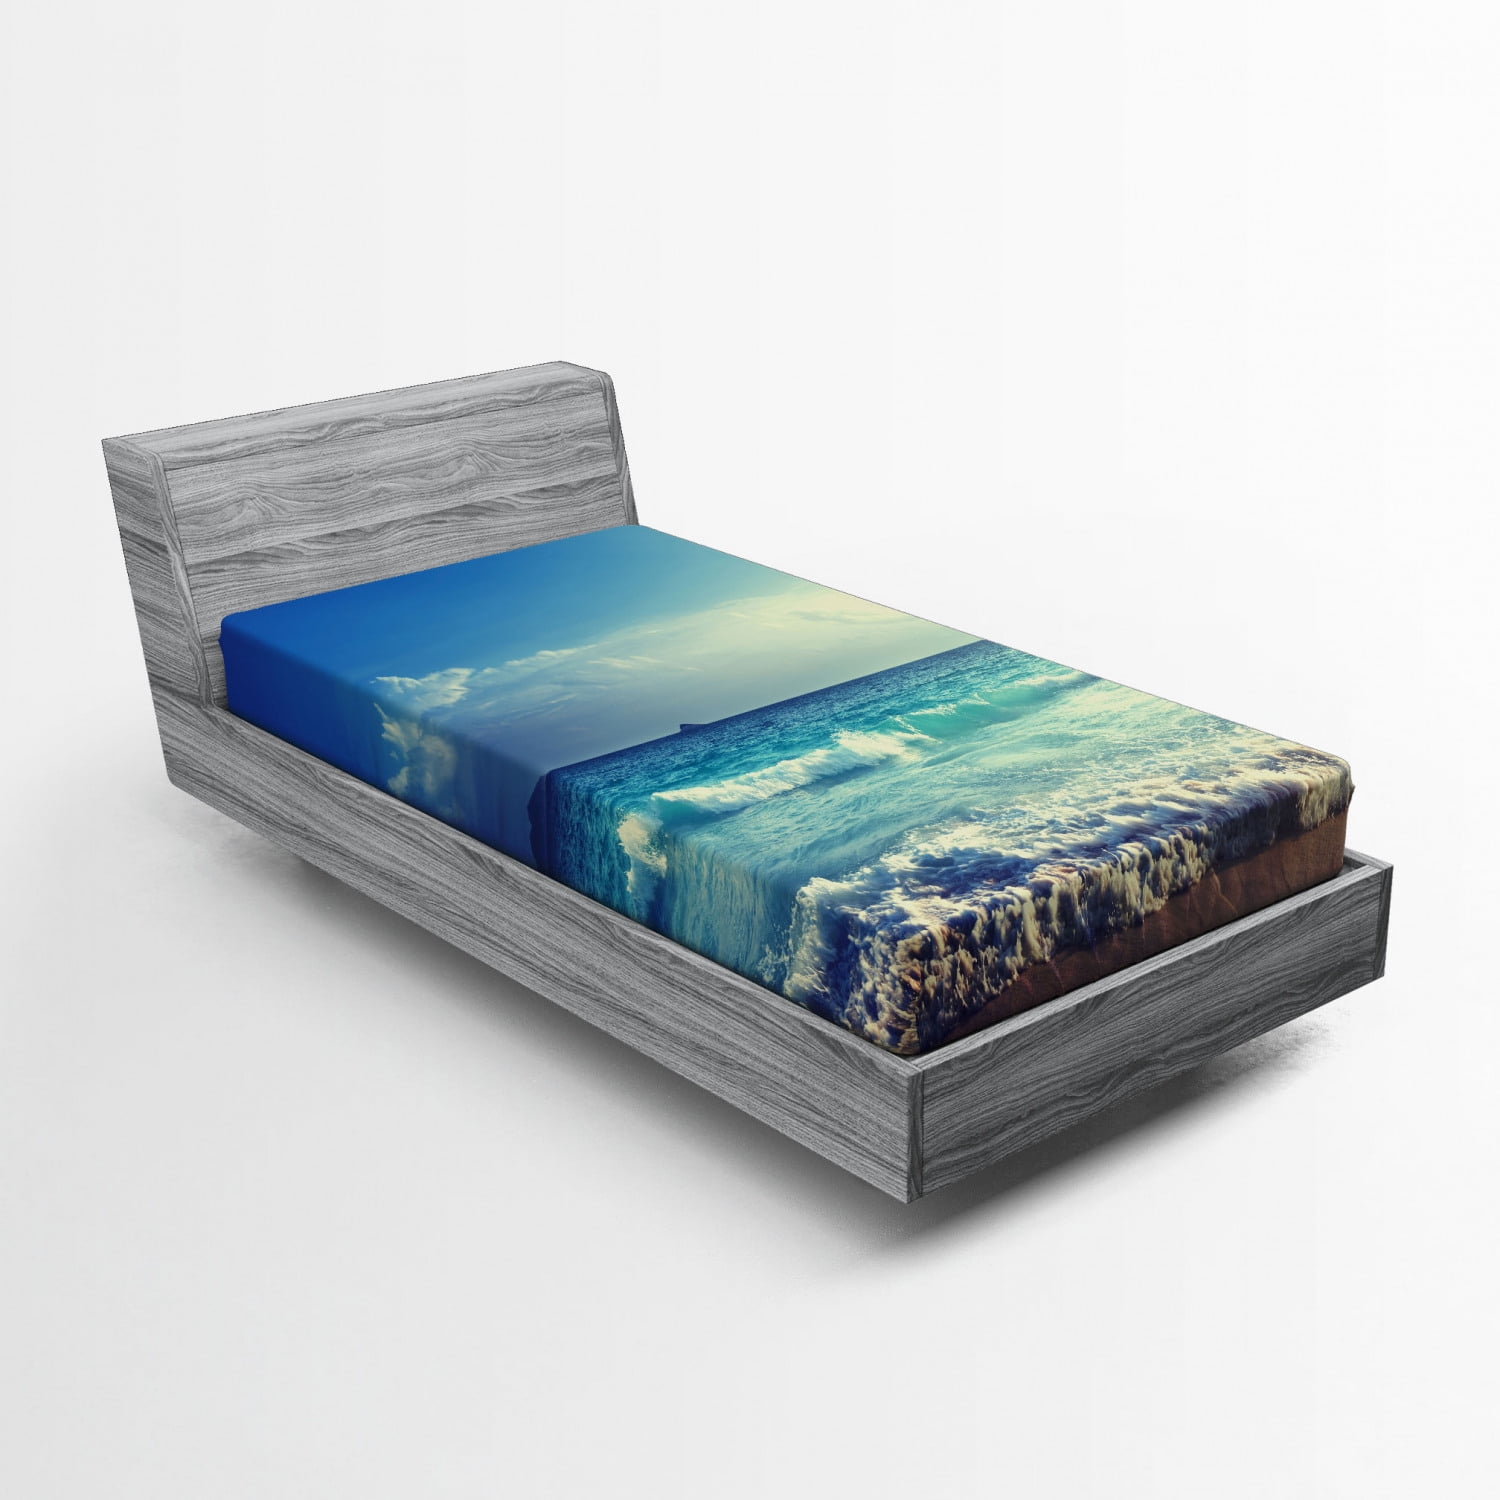 Soft Decorative Fabric Bedding All-Round Elastic Pocket Tropical Island Paradise Beach at Sunset Time with Waves and The Misty Sea Image Turquoise Cream Ambesonne Ocean Fitted Sheet Queen Size